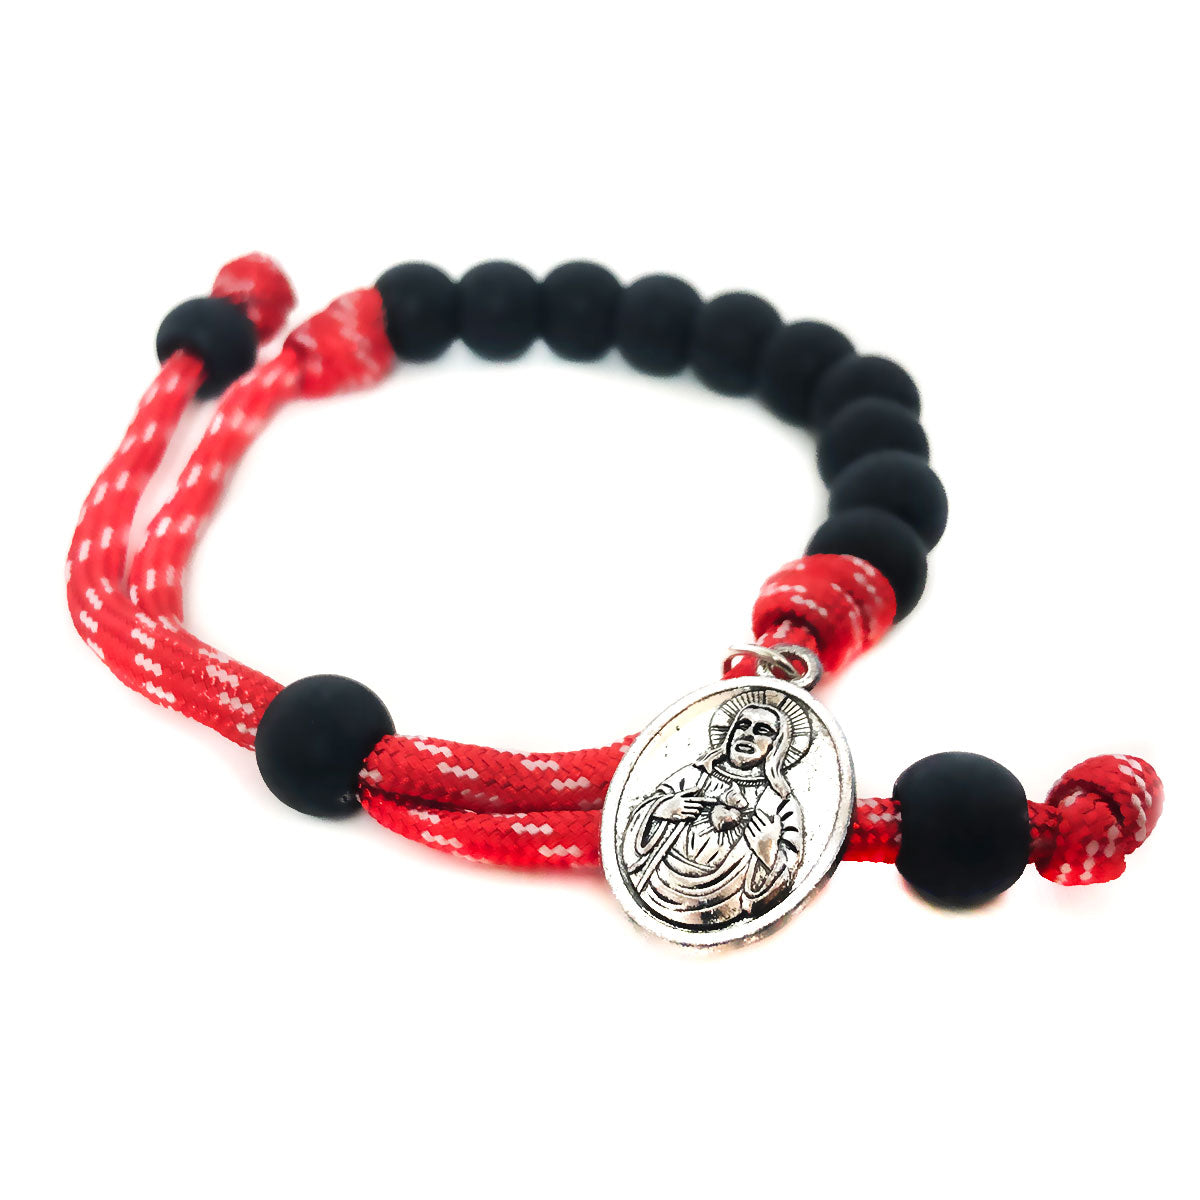 Sacred Heart of Jesus Red and Black Paracord Rosary and Rosary Bracelet Set by Catholic Heirlooms